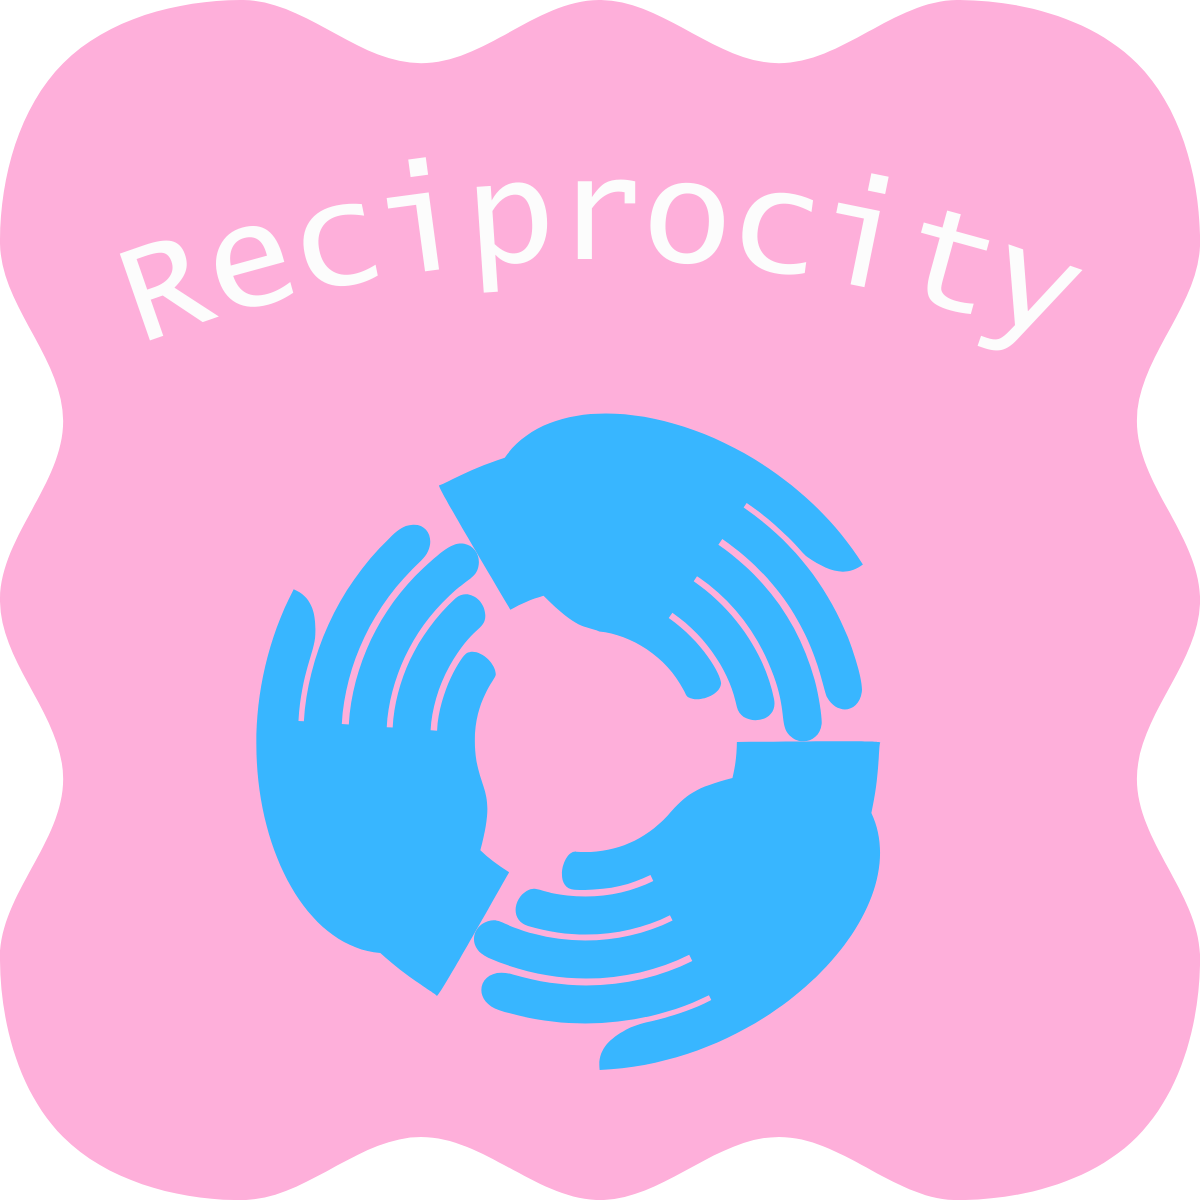 A pink wavy blob with "Reciprocity" written inside, with an image of 3 blue hands circling each other.